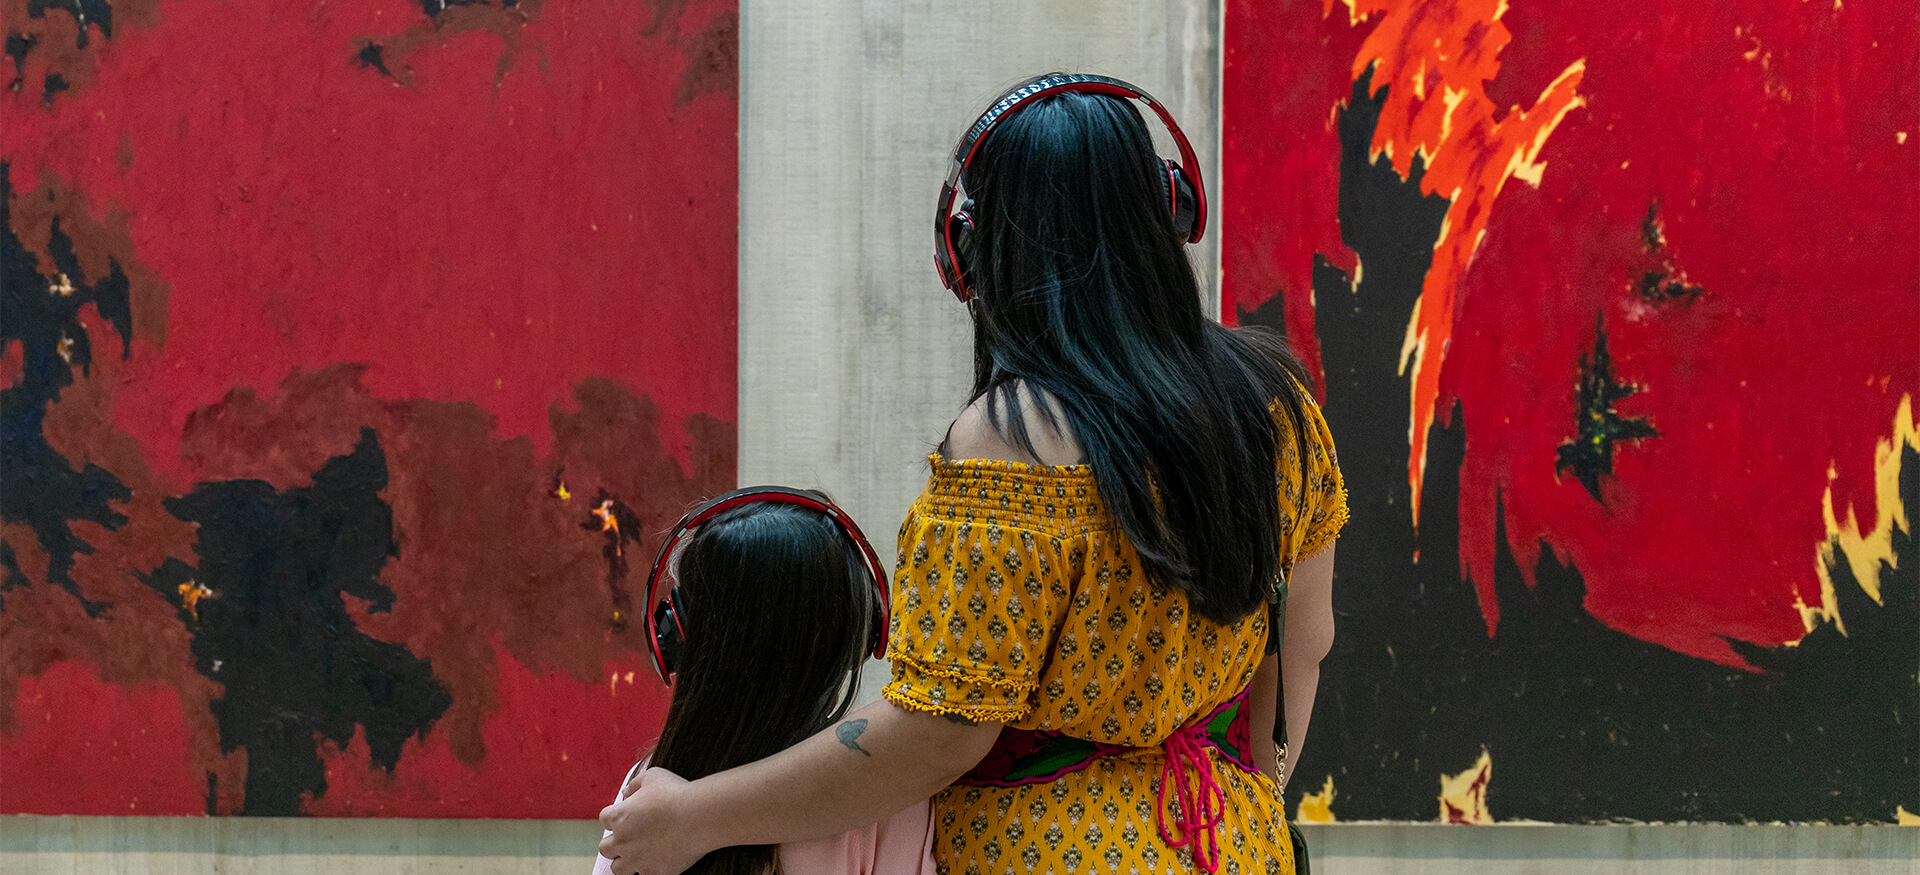 A mom puts her arm around her daughter's shoulder as they both wear headphones and look at two red and black abstract paintings on the wall